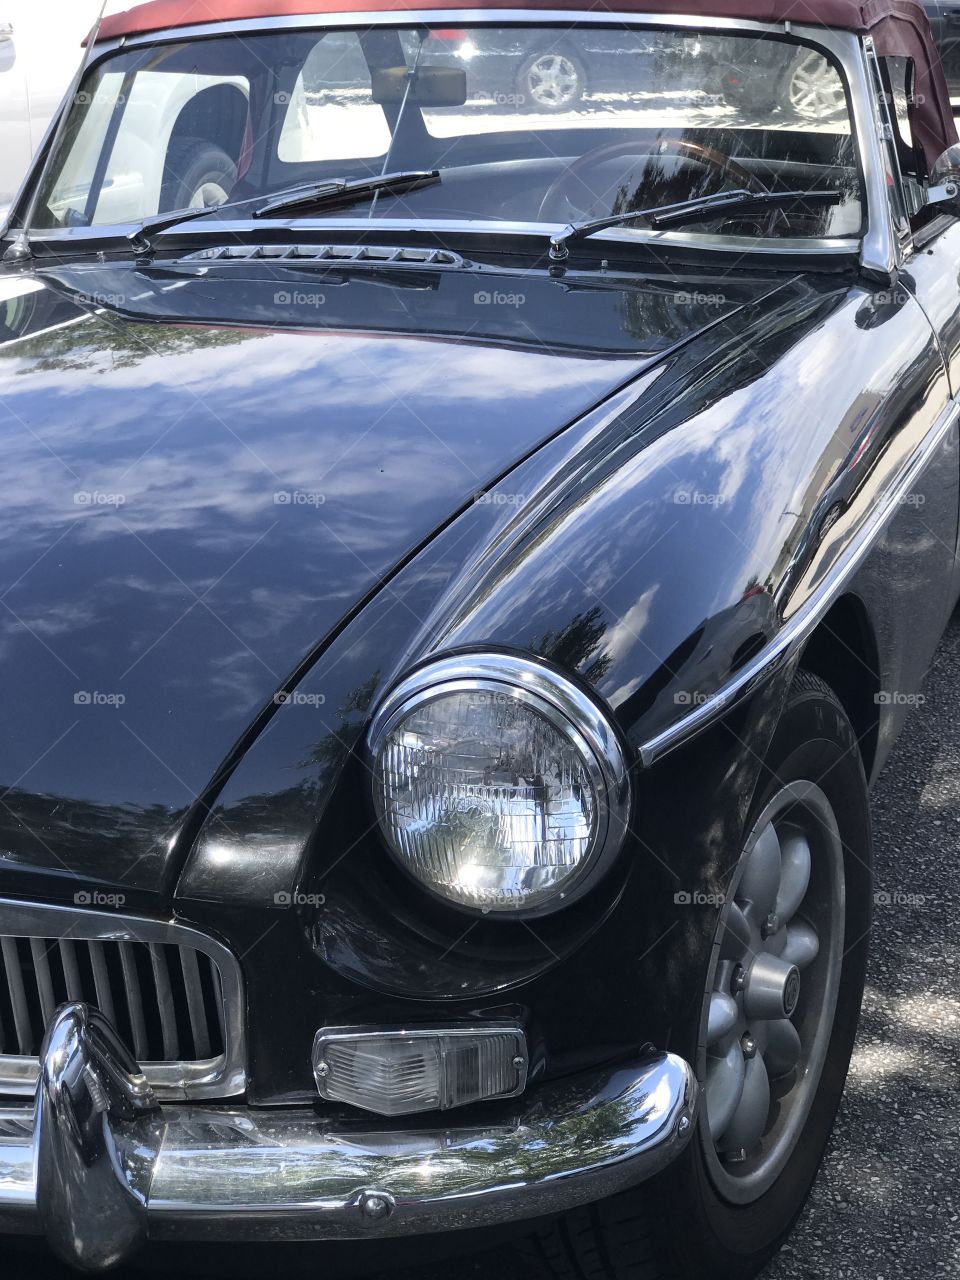 .odnalrO ni detacol tneduts FCU nA  .asleS yb kcilC Follow me @Selsa.Notes, Selsa.Clicks, or Selsa.   This an antique which was manufactured between 1955 - 1962.  This is a black convertible MG with red leather interior.   